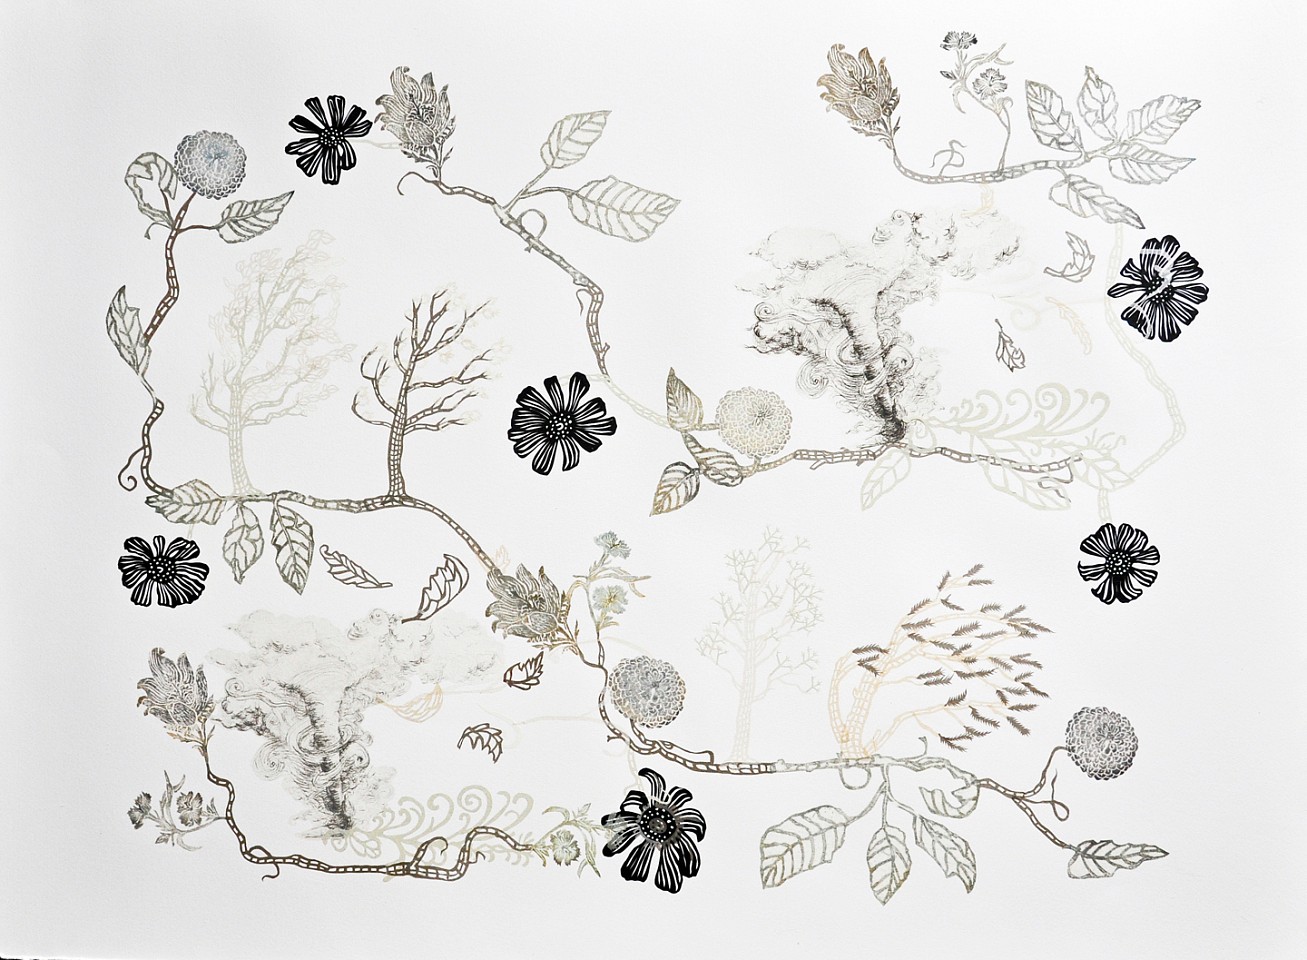 Susan Graham
Floating Landscape with Tornados, 2019
GRA032
chine colle paper cut out, drypoint etching, and ukiyo-e woodblck print on cotton paper, 28 1/4 x 38 1/2 inches